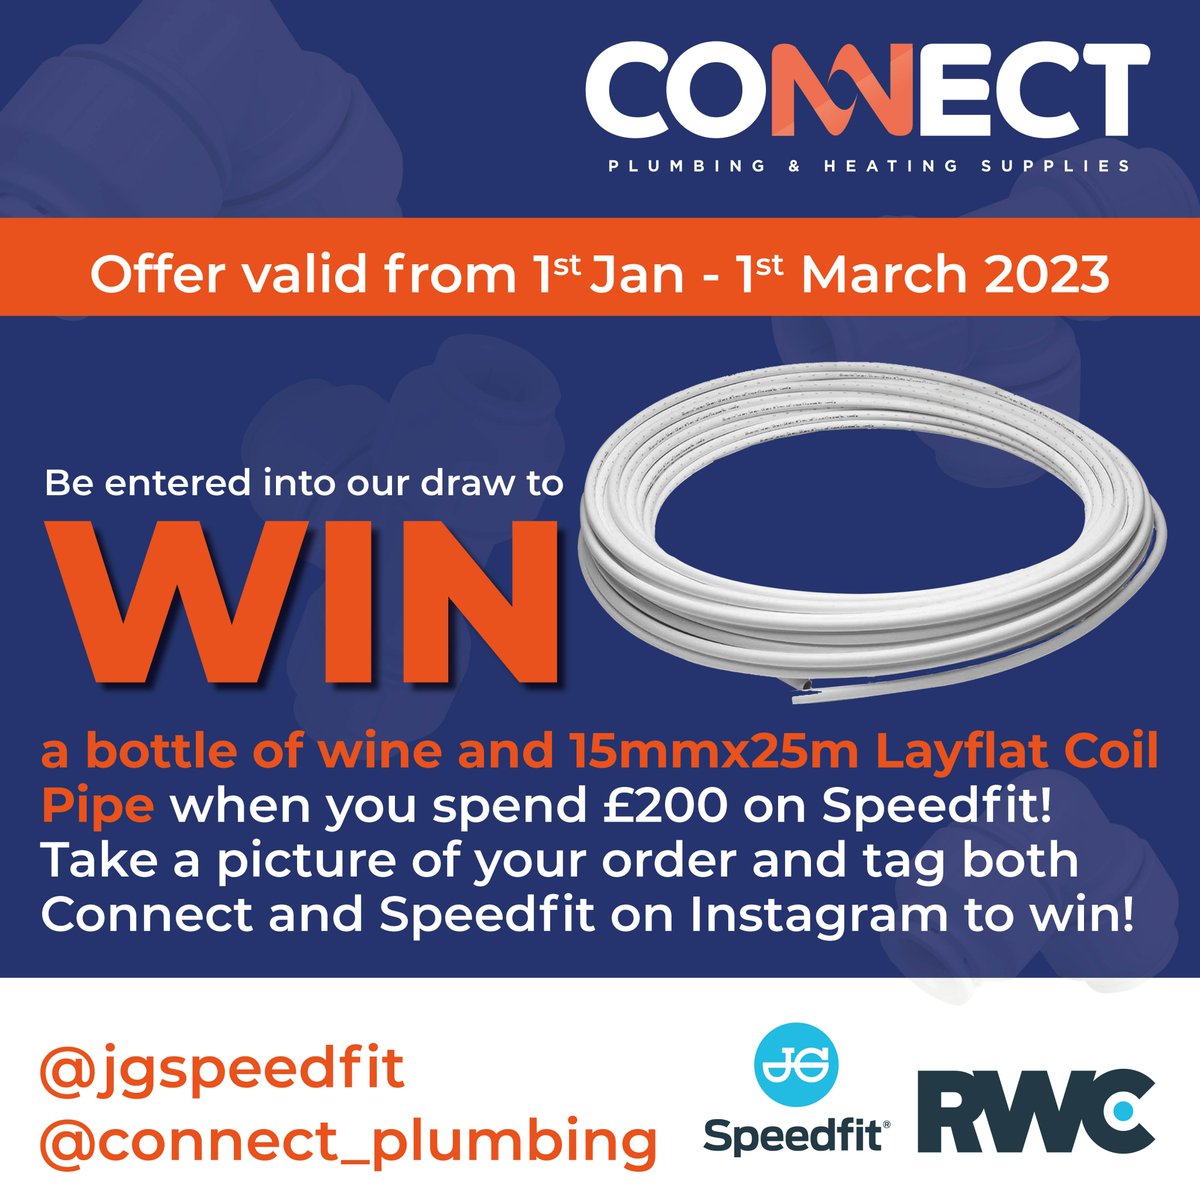 WIN a bottle of wine and a Layflat Coil Pipe when you spend £200 on Speedfit! Take a picture of your order and make sure you tag us and @JGSpeedfit 📸🍷
.
.
.
.
#connectplumbing #connectheating #speedfit #plumbing #win